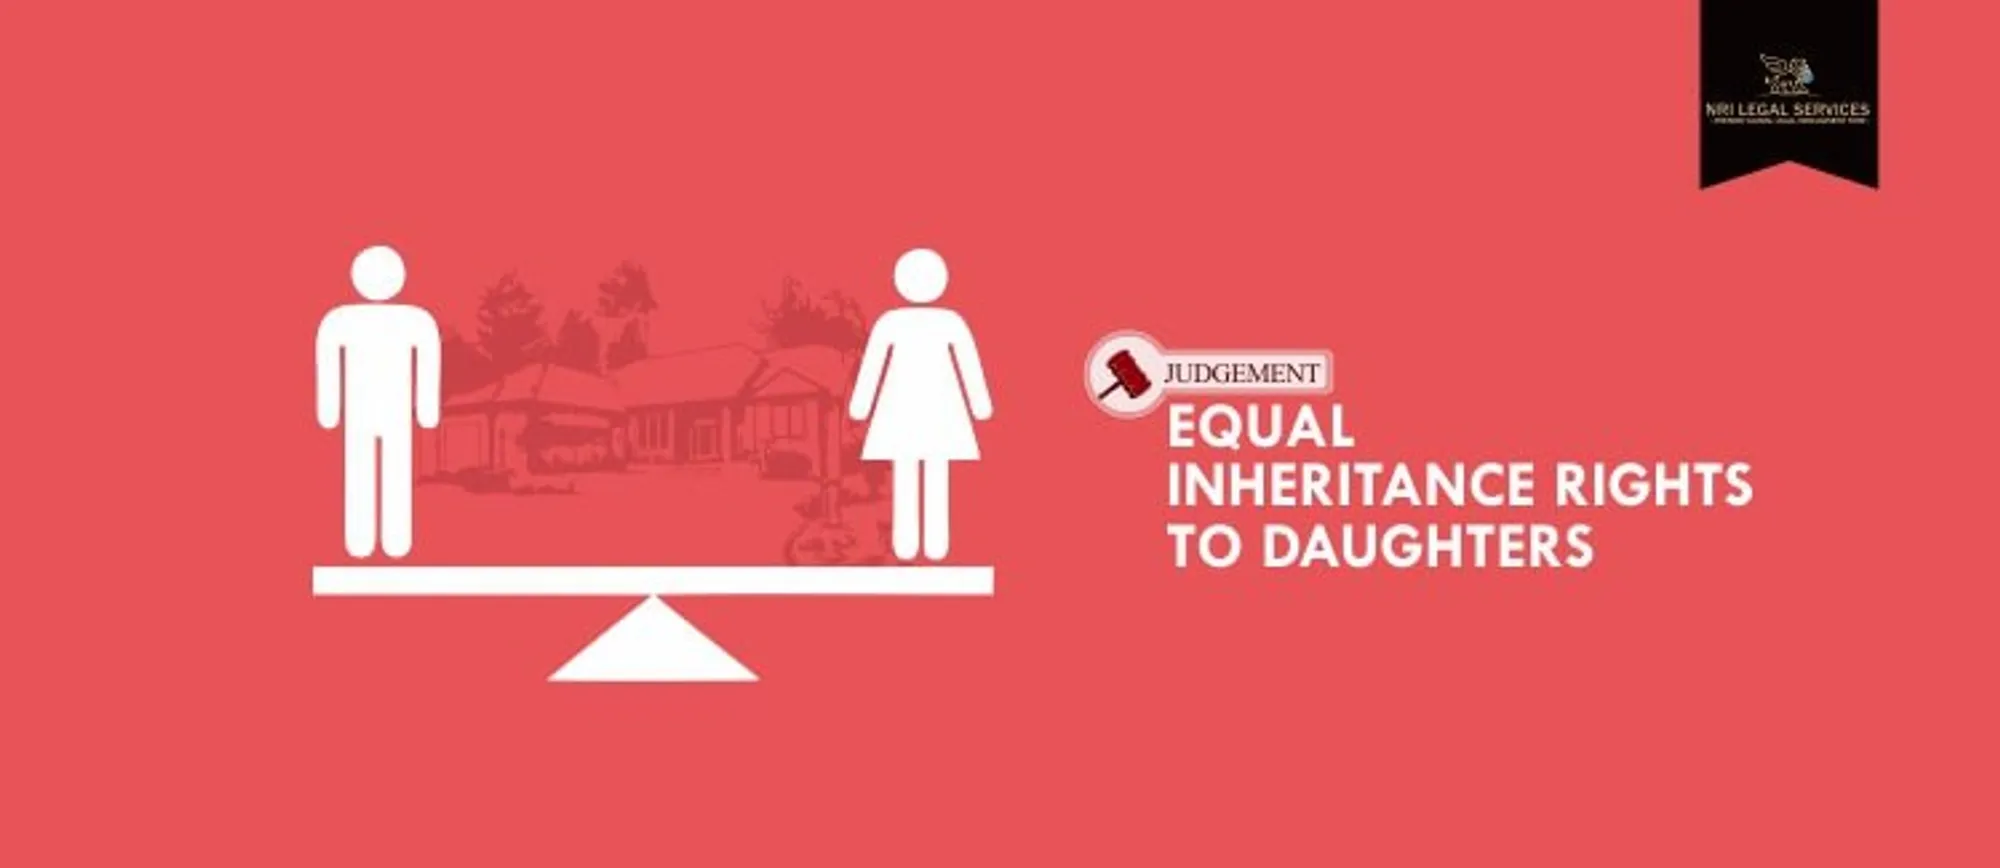 Equal inheritance rights to daughters – Supreme court judgement backs daughters right to property